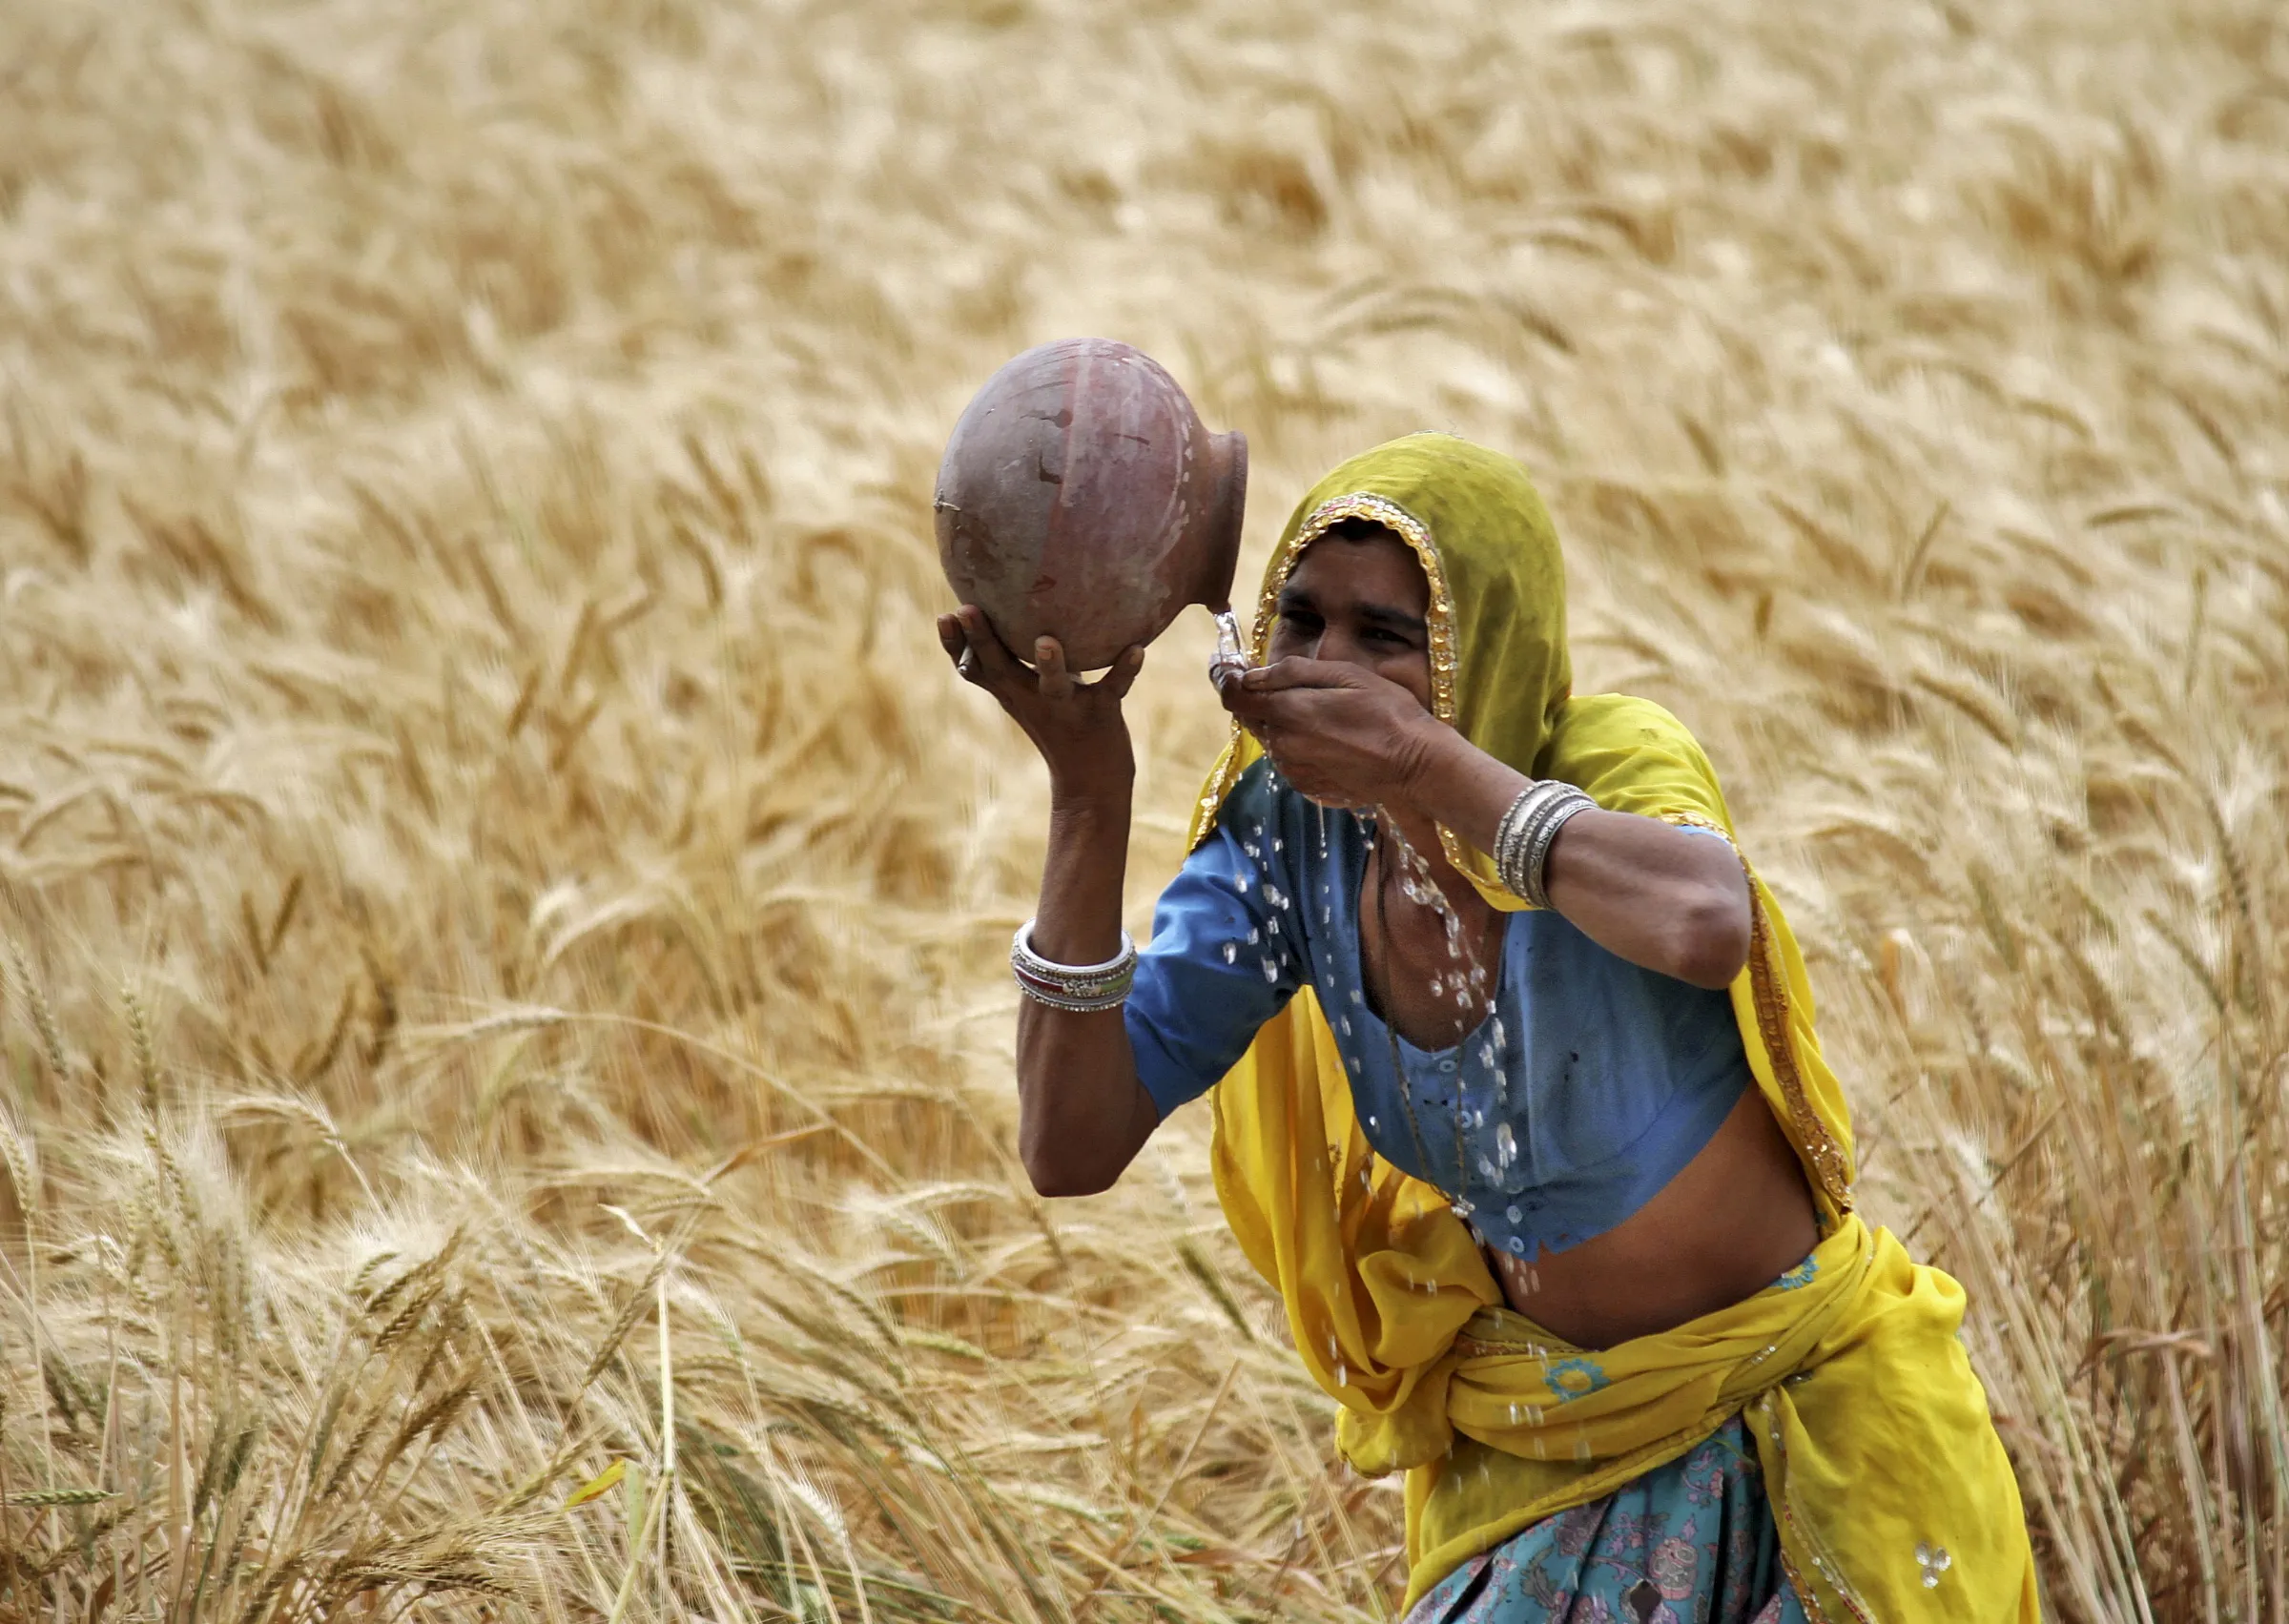 A woman farmer drinks water from an earthen pot in a wheat field on the outskirts of Ajmer in the desert Indian state of Rajasthan, April 4, 2015. India is the world's biggest wheat producer after China. REUTERS/Himanshu Sharma